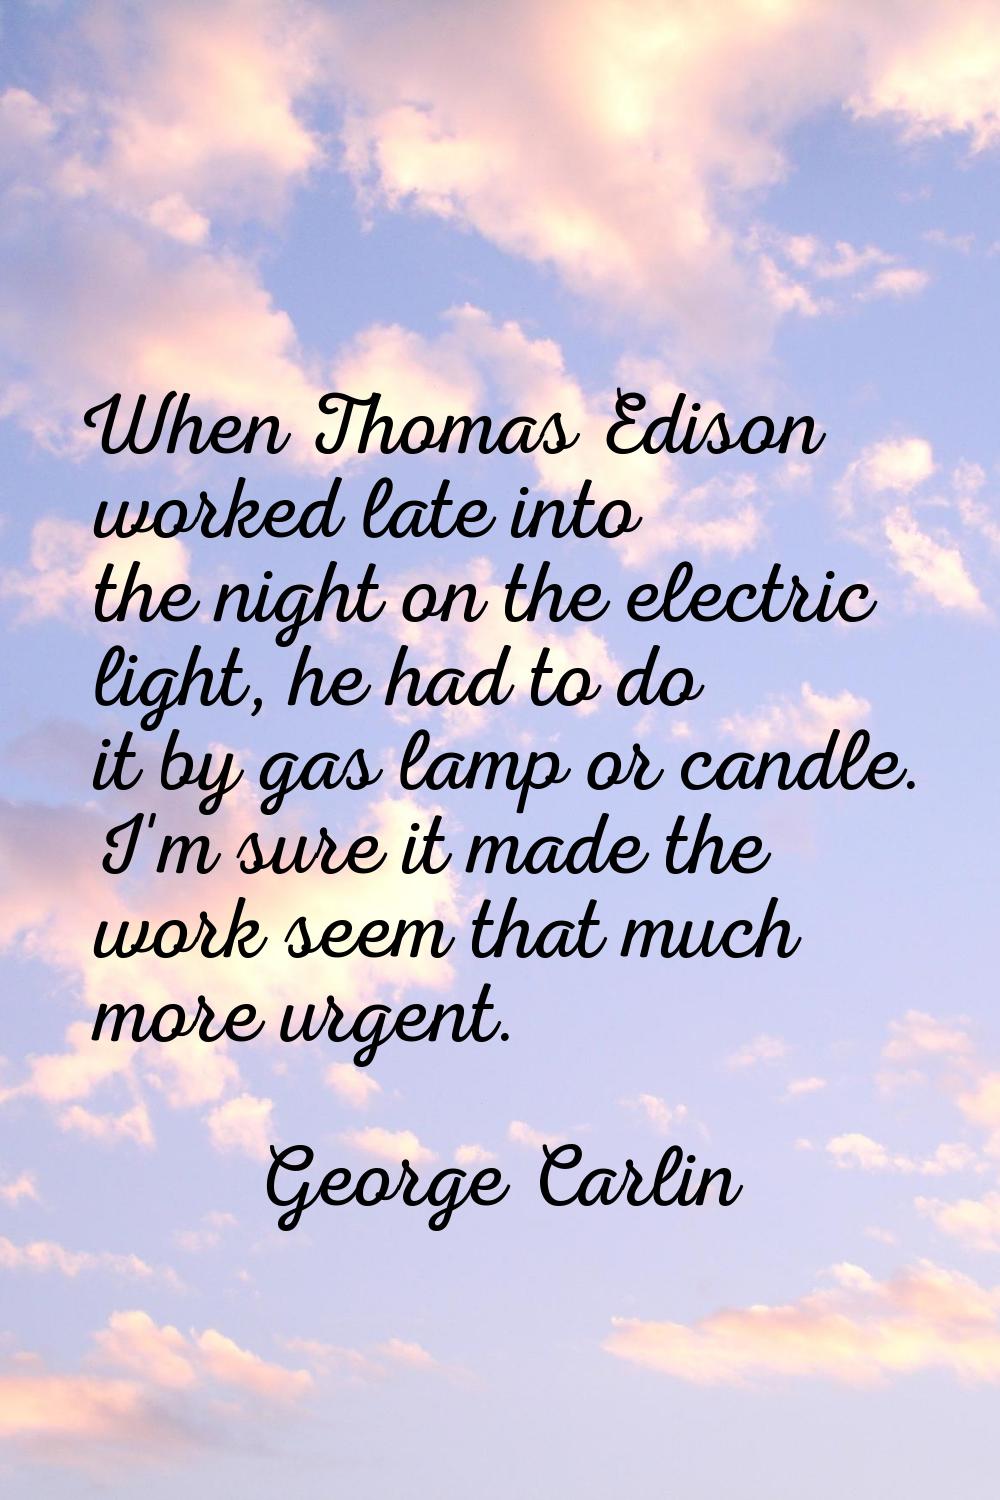 When Thomas Edison worked late into the night on the electric light, he had to do it by gas lamp or